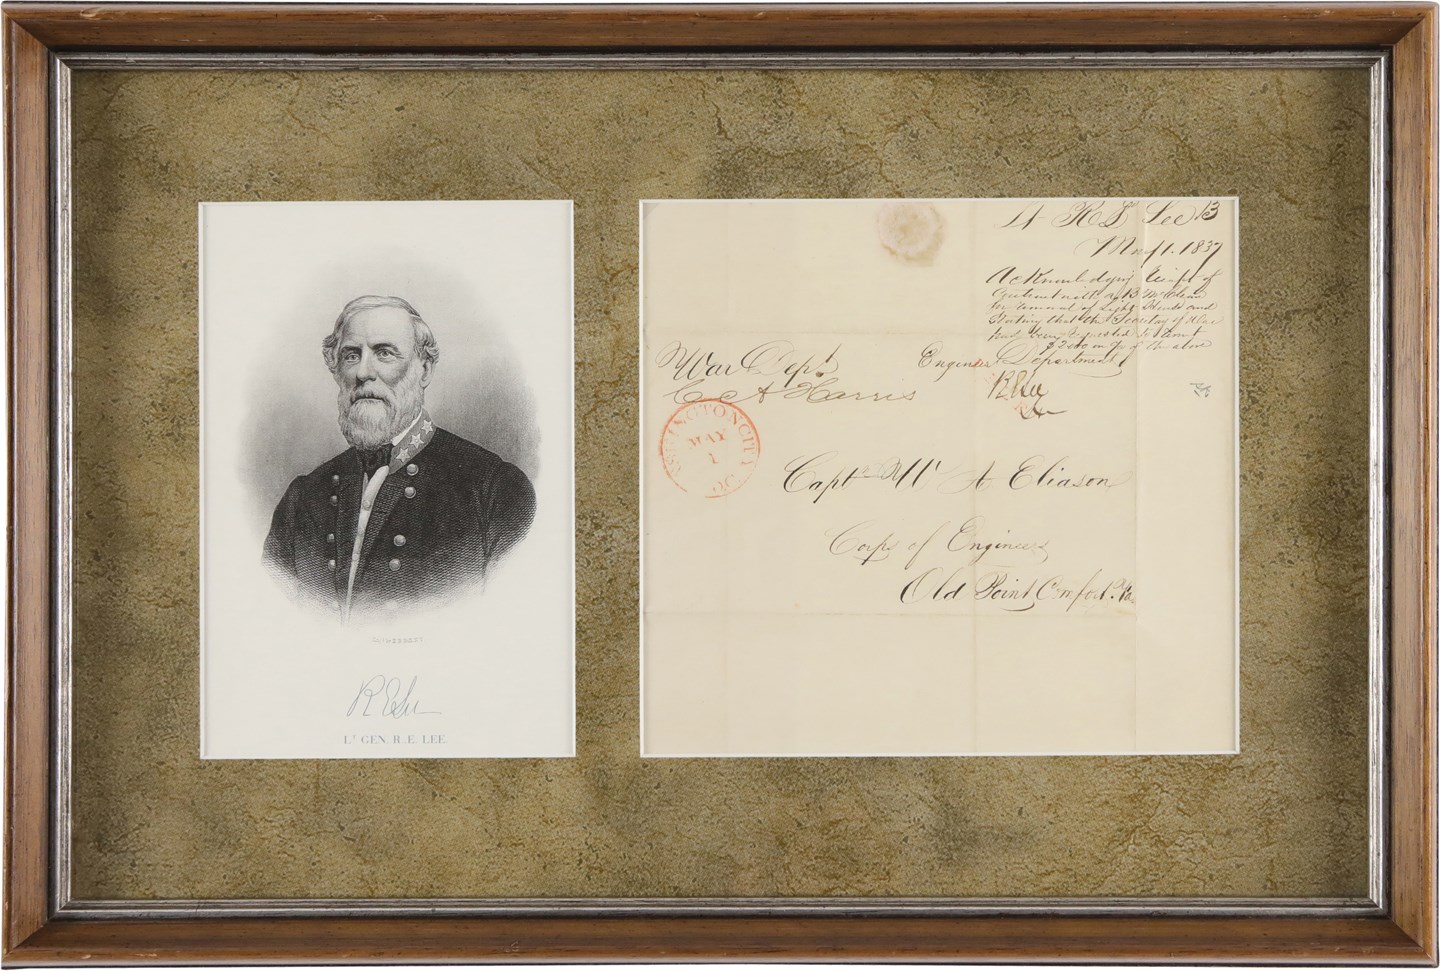 1837 Robert E. Lee Signed and Hand Addressed Free Frank Envelope to Army Captain (PSA)